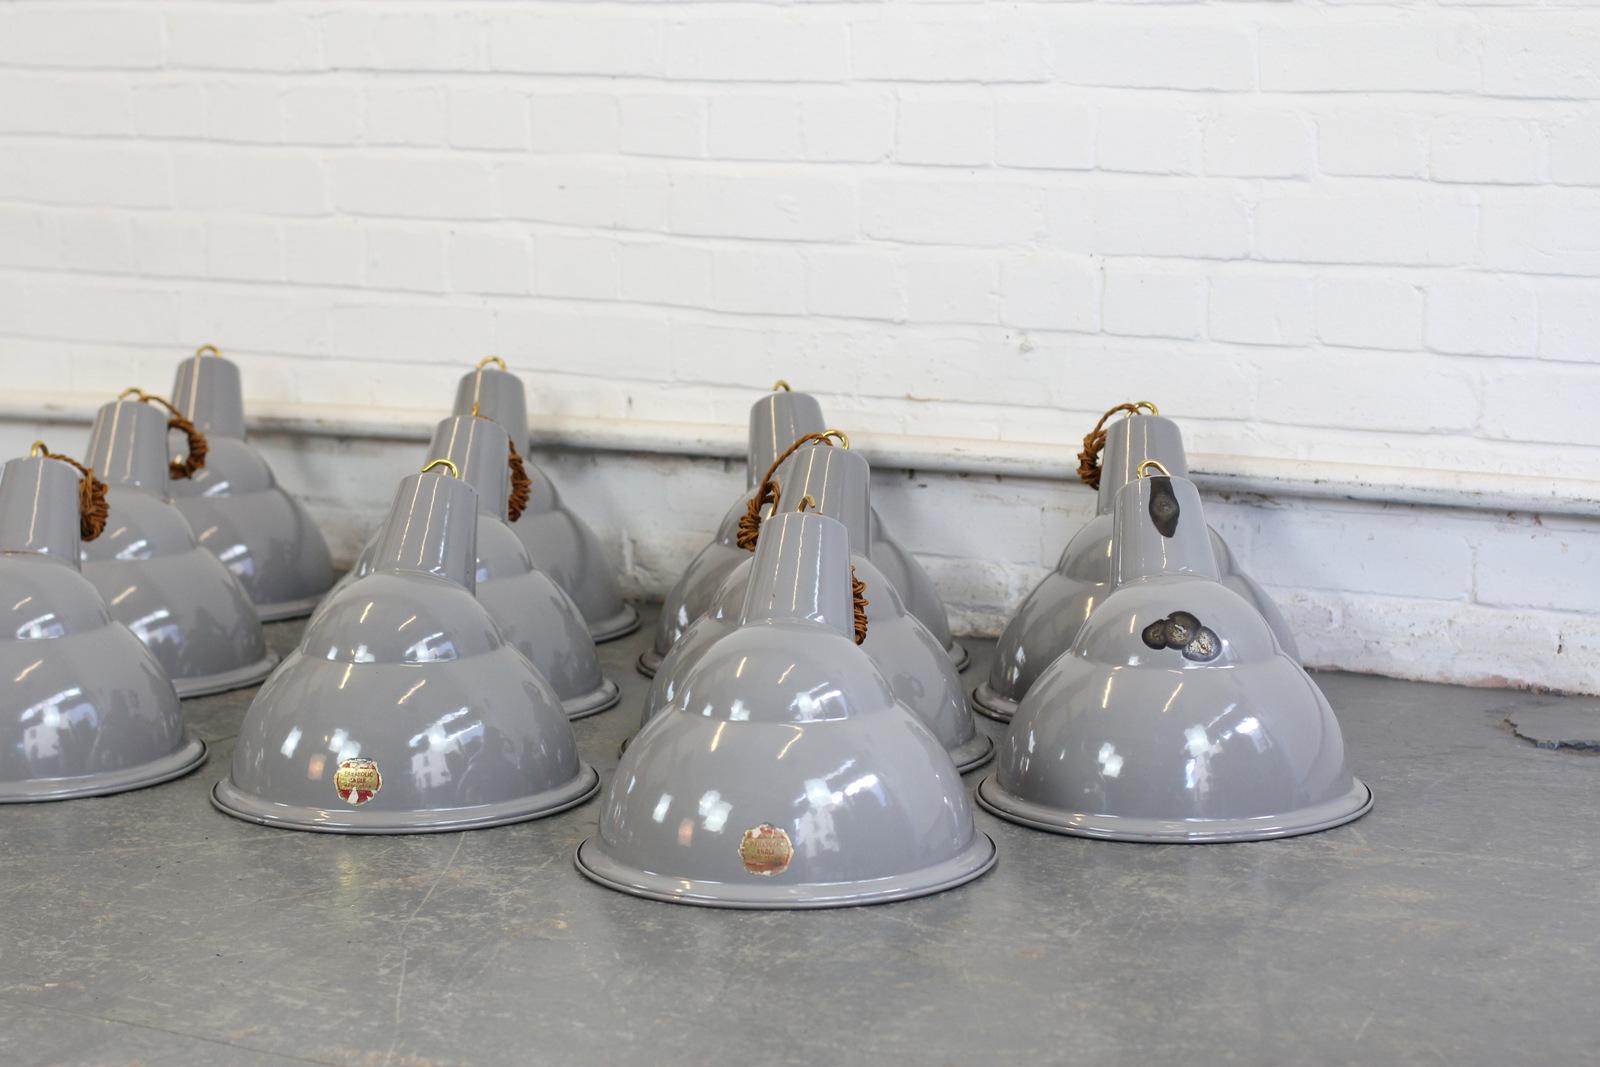 Grey Parabolic factory lights by Benjamin, circa 1950s

- Price is per light (29 available)
- Vitreous grey enamel 
- Some shades still retain their original foil badges
- Comes with 100cm of gold twist cable
- Comes with 100cm of suspension